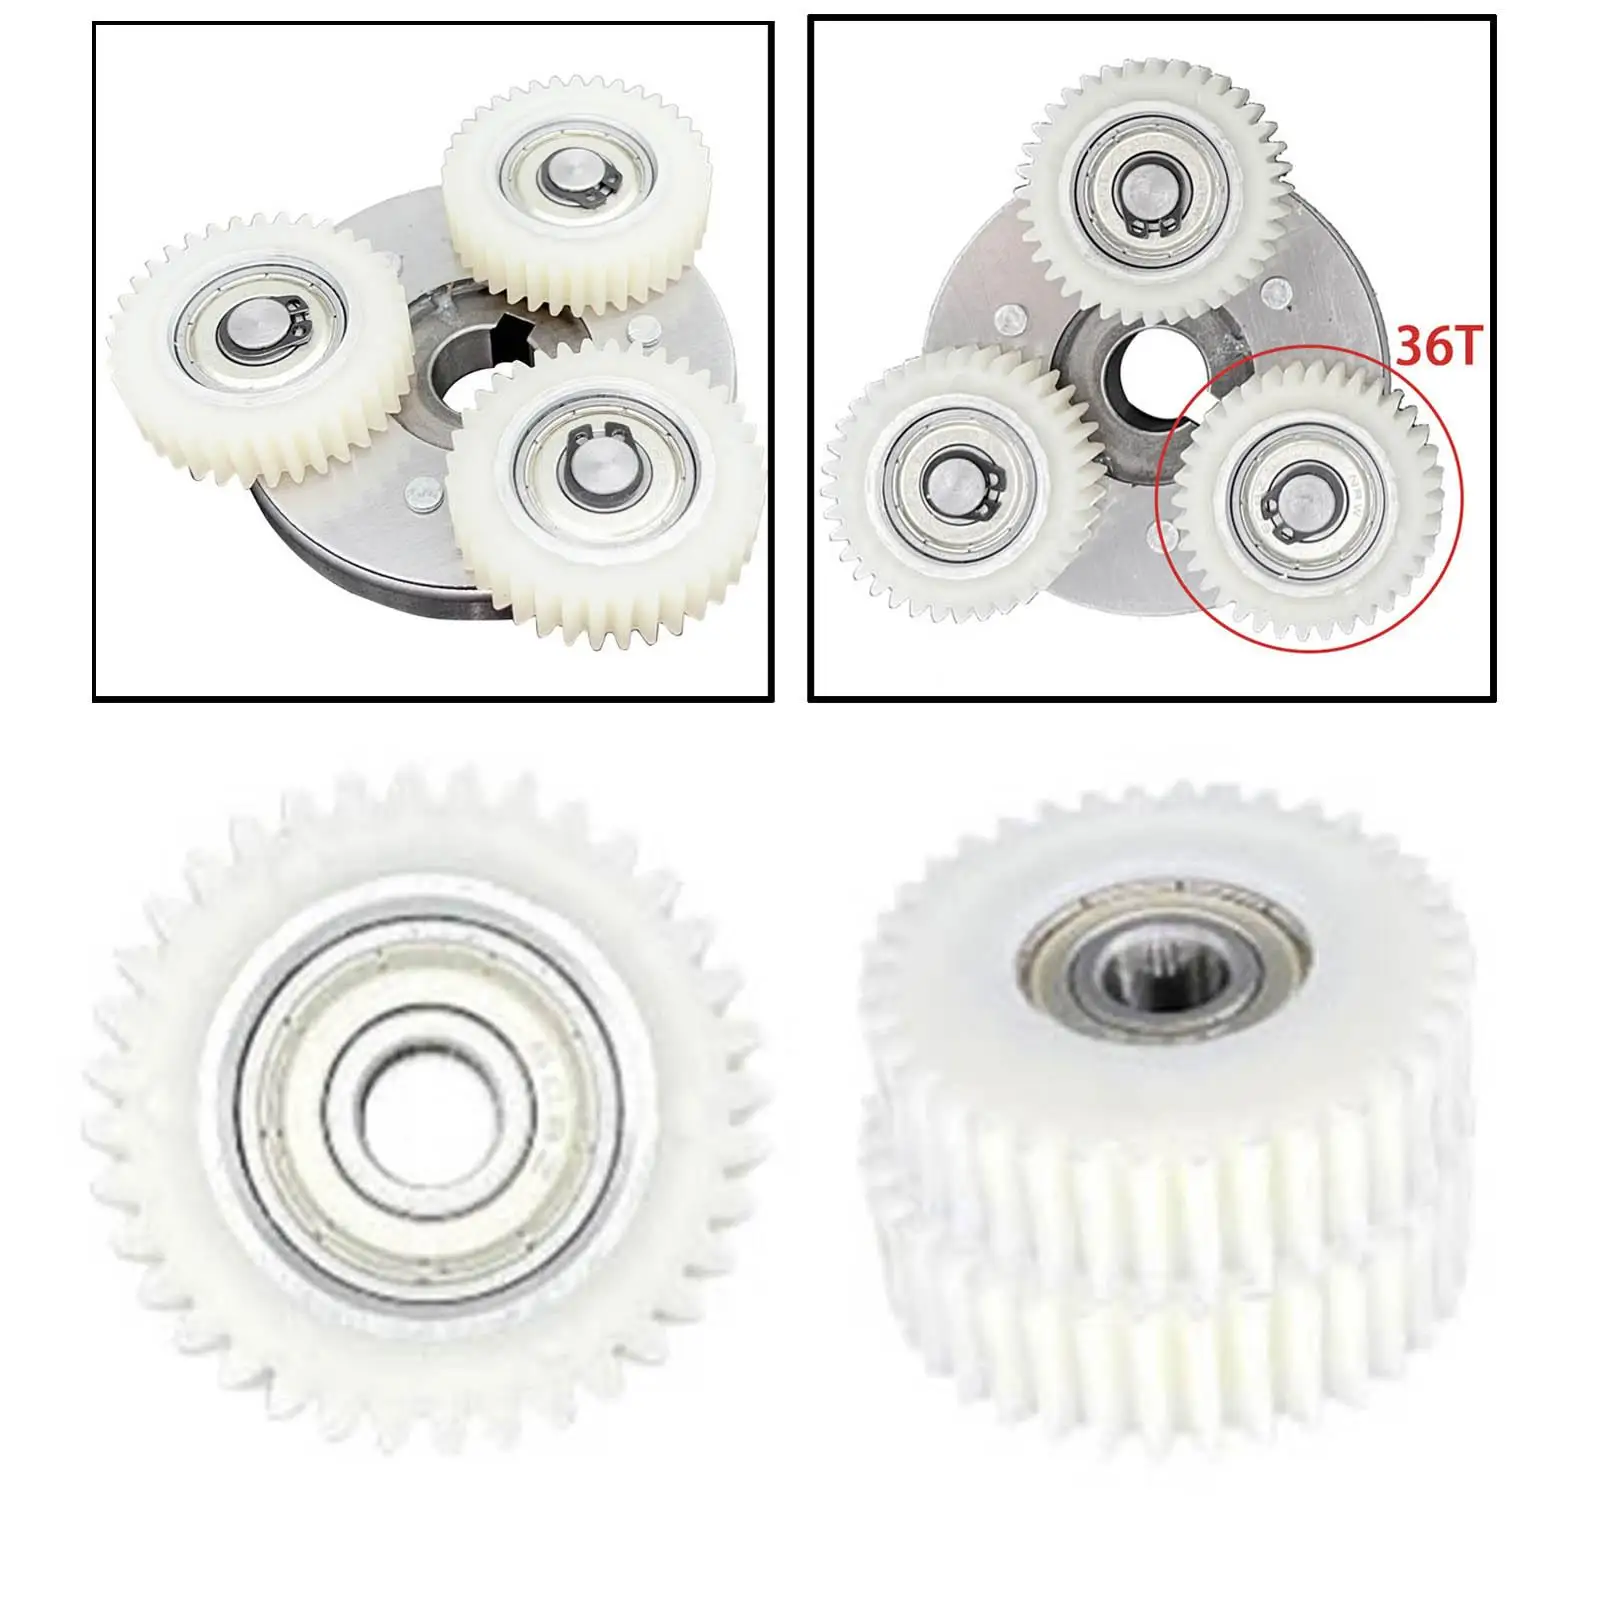 3Pcs 36T Planetary Gears Part Set for   Motor Electric Vehicle